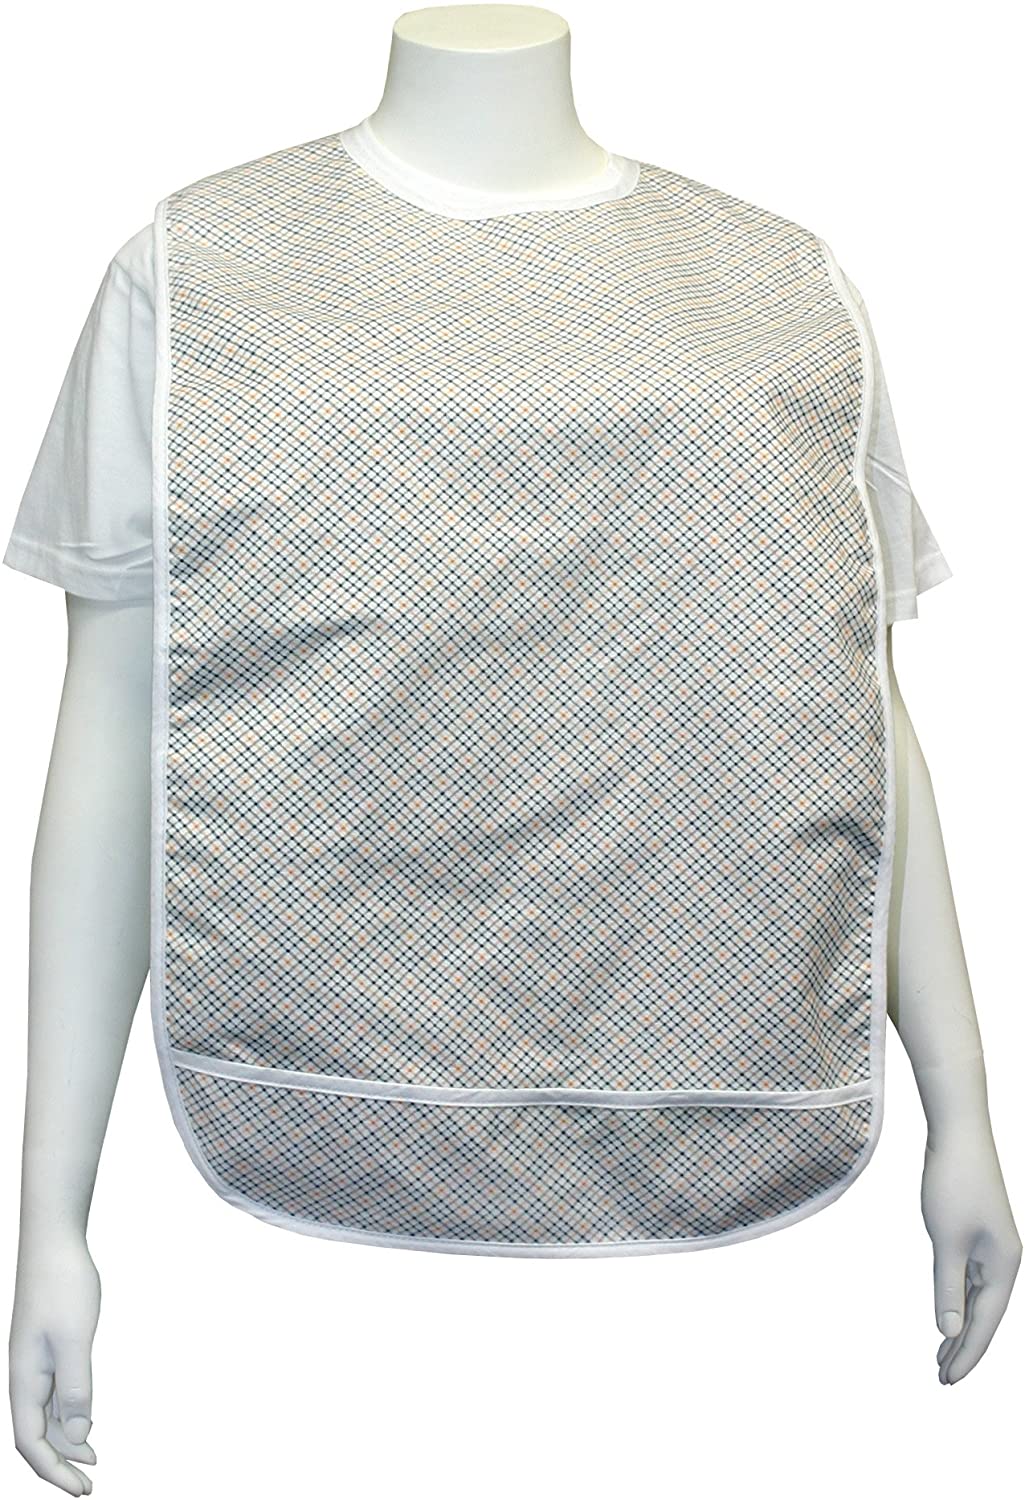 Premium Vinyl Adult Bibs with Crumb Catcher (Multiple Colors) - Noble's Health Care Products Solutions